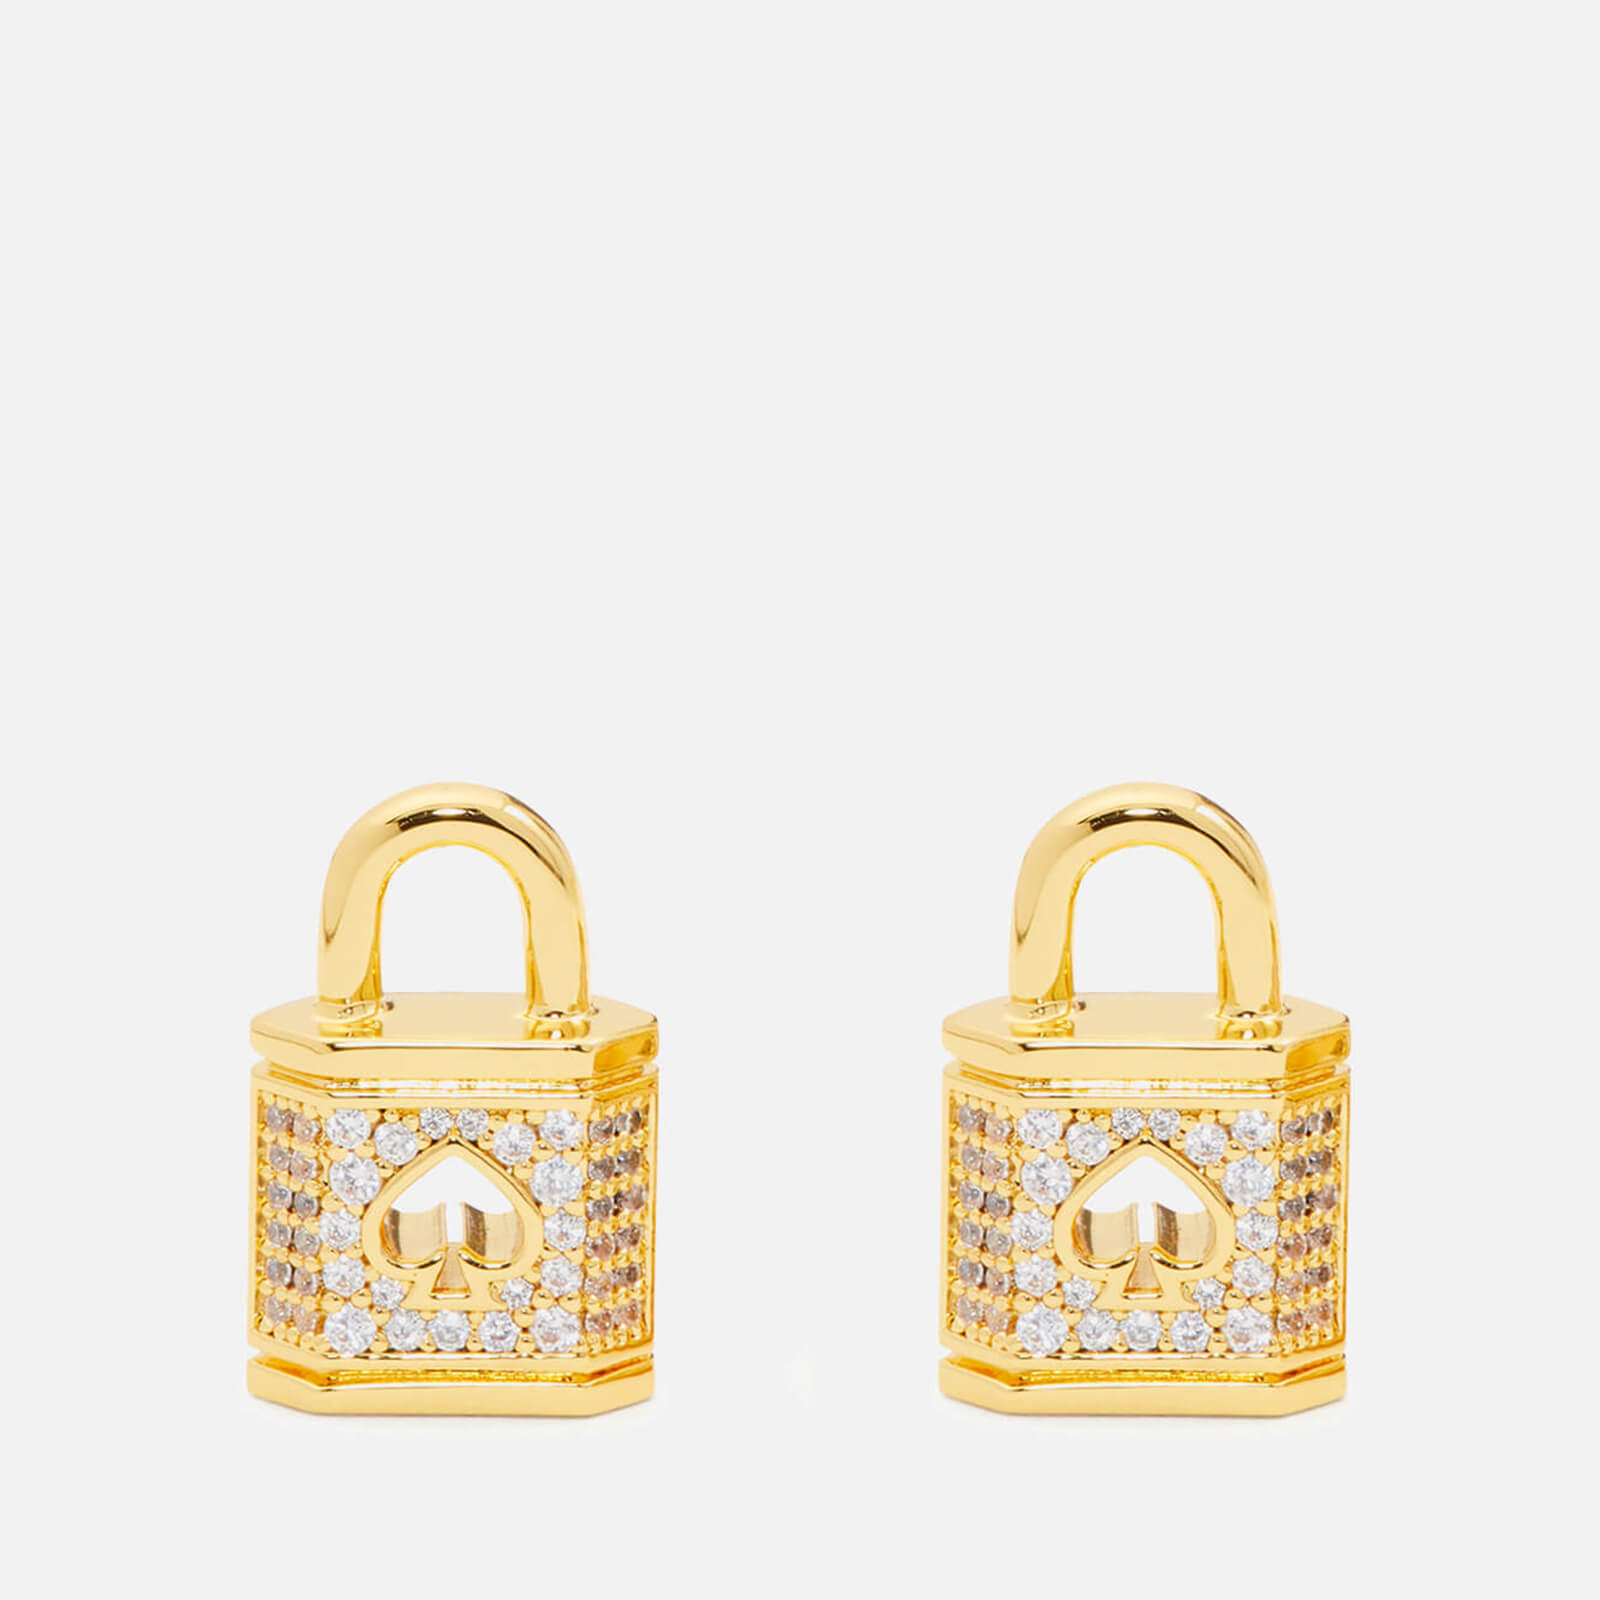 Kate Spade New York Lock and Spade Gold-Tone and Cubic Zirconia Pave Studs